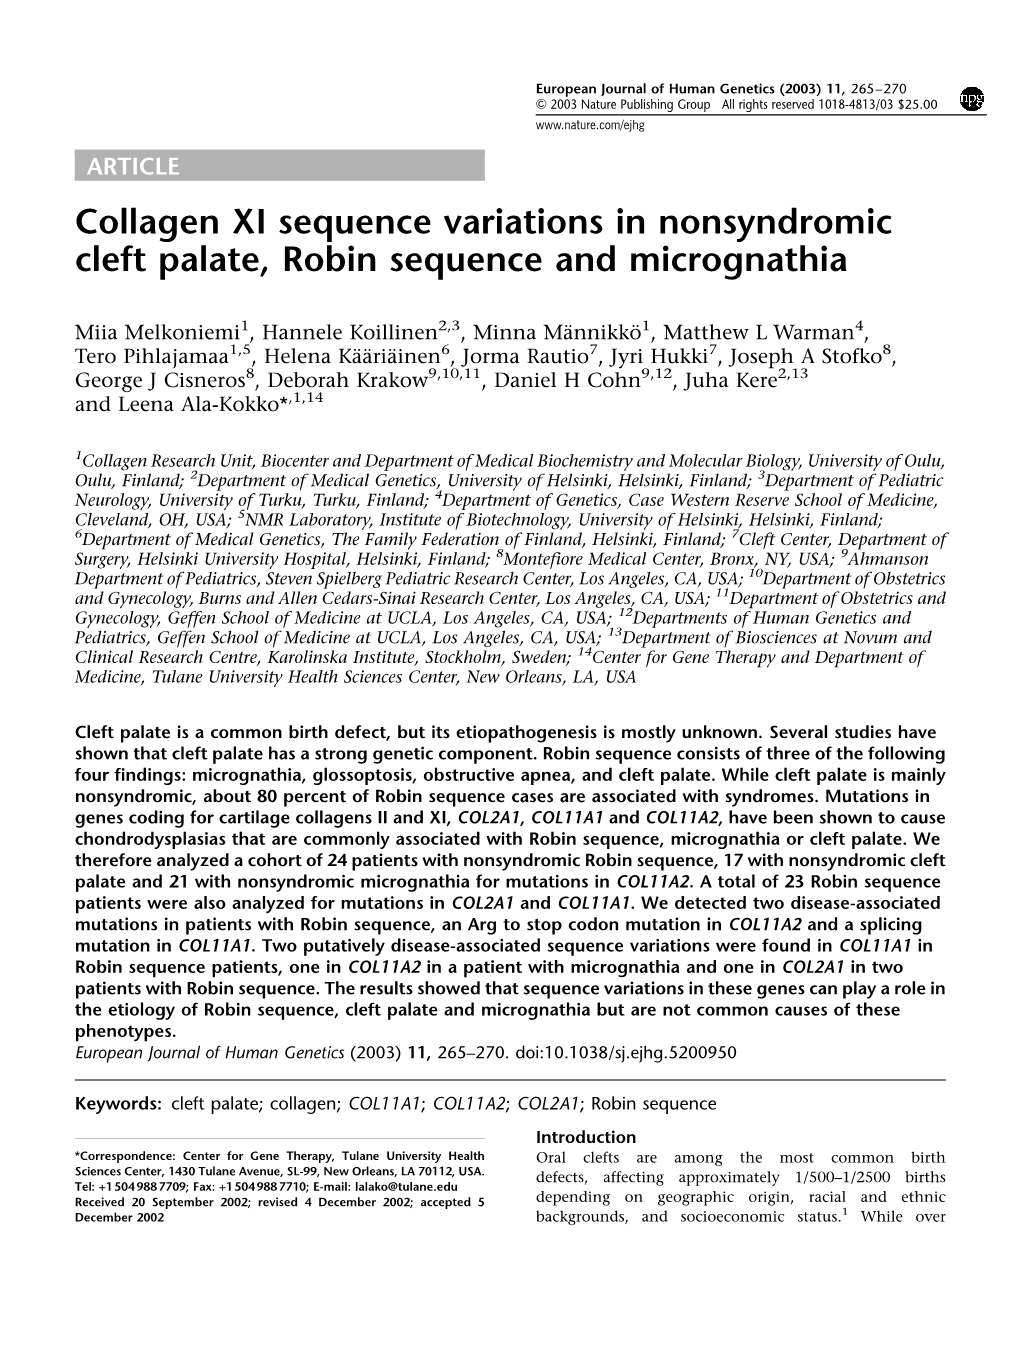 Collagen XI Sequence Variations in Nonsyndromic Cleft Palate, Robin Sequence and Micrognathia